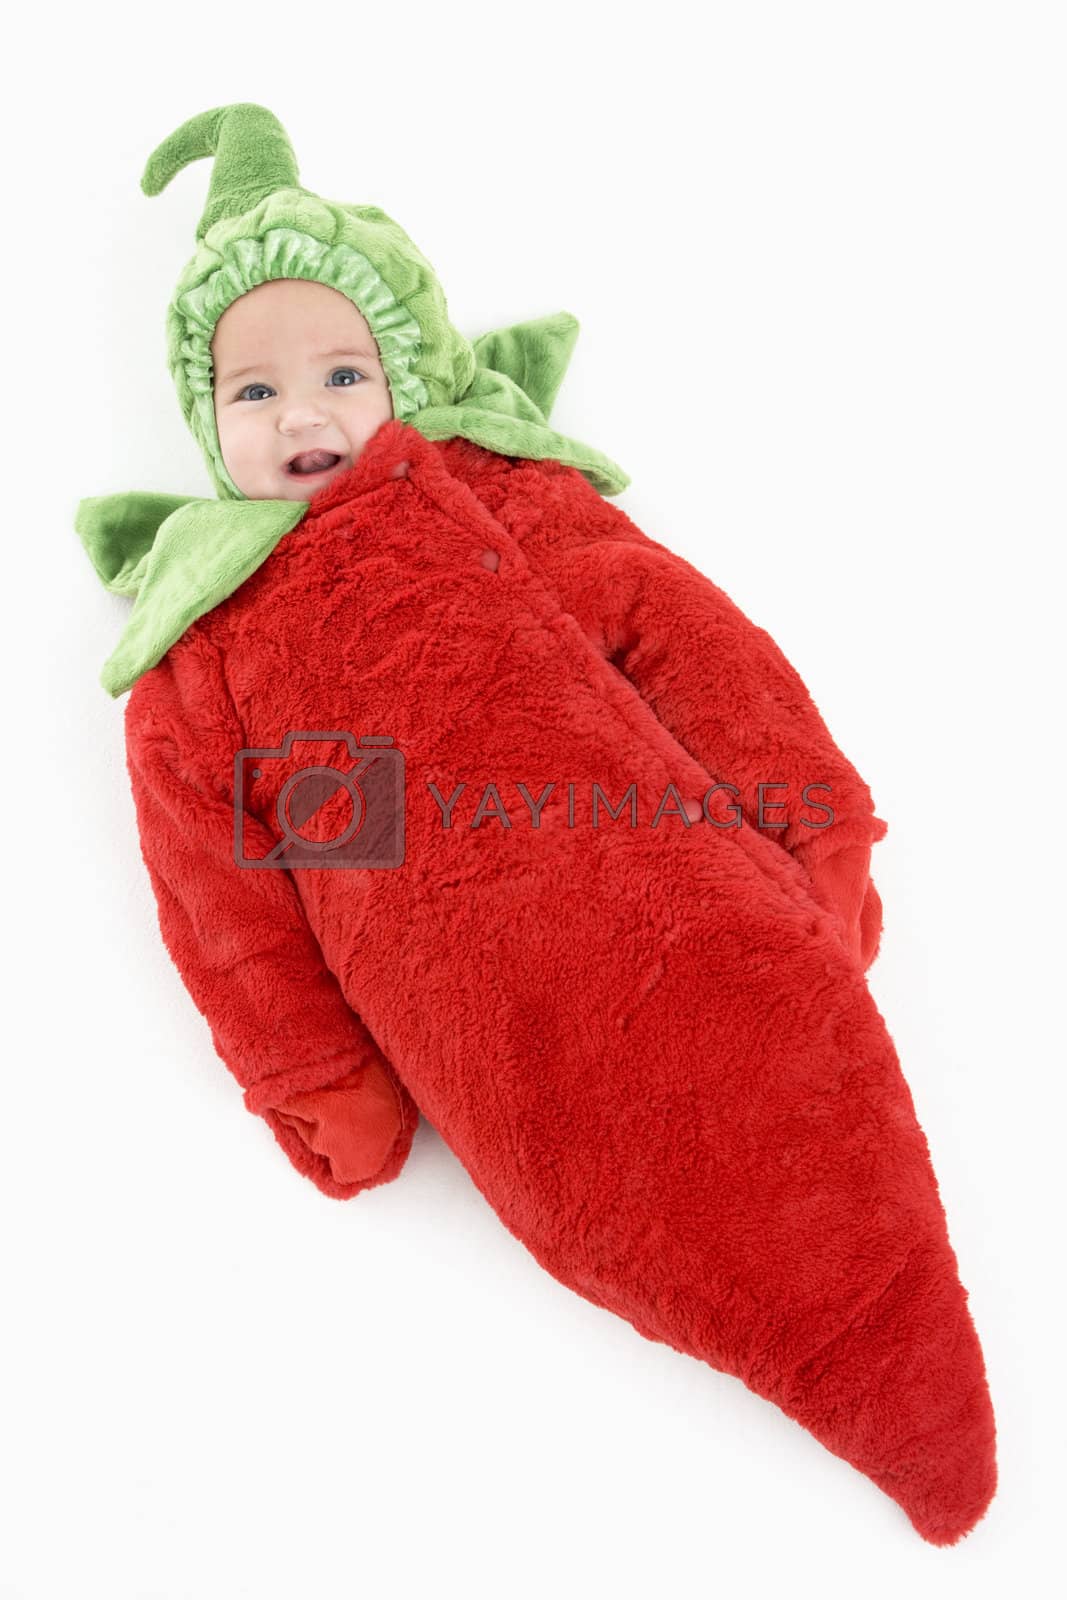 Royalty free image of Baby in pepper costume by MonkeyBusiness